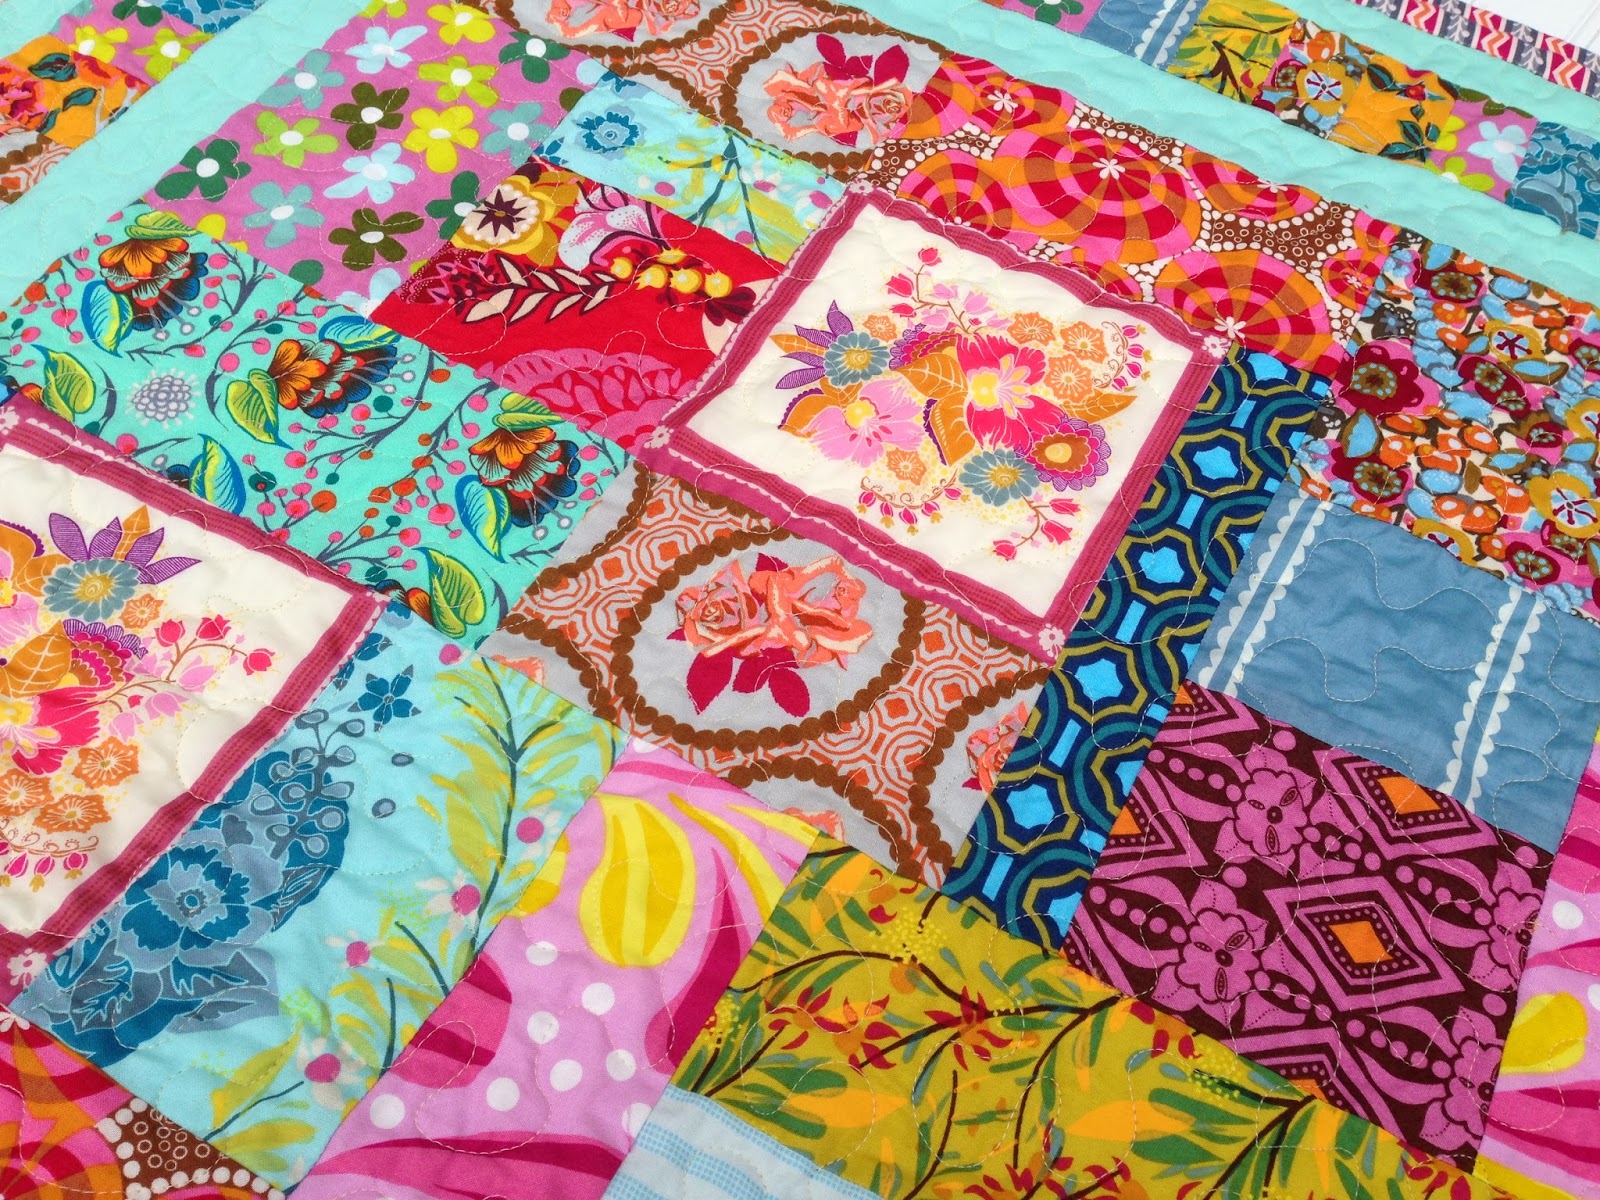 Mama Roux: For the Love of Anna! Jewel Box Quilt.